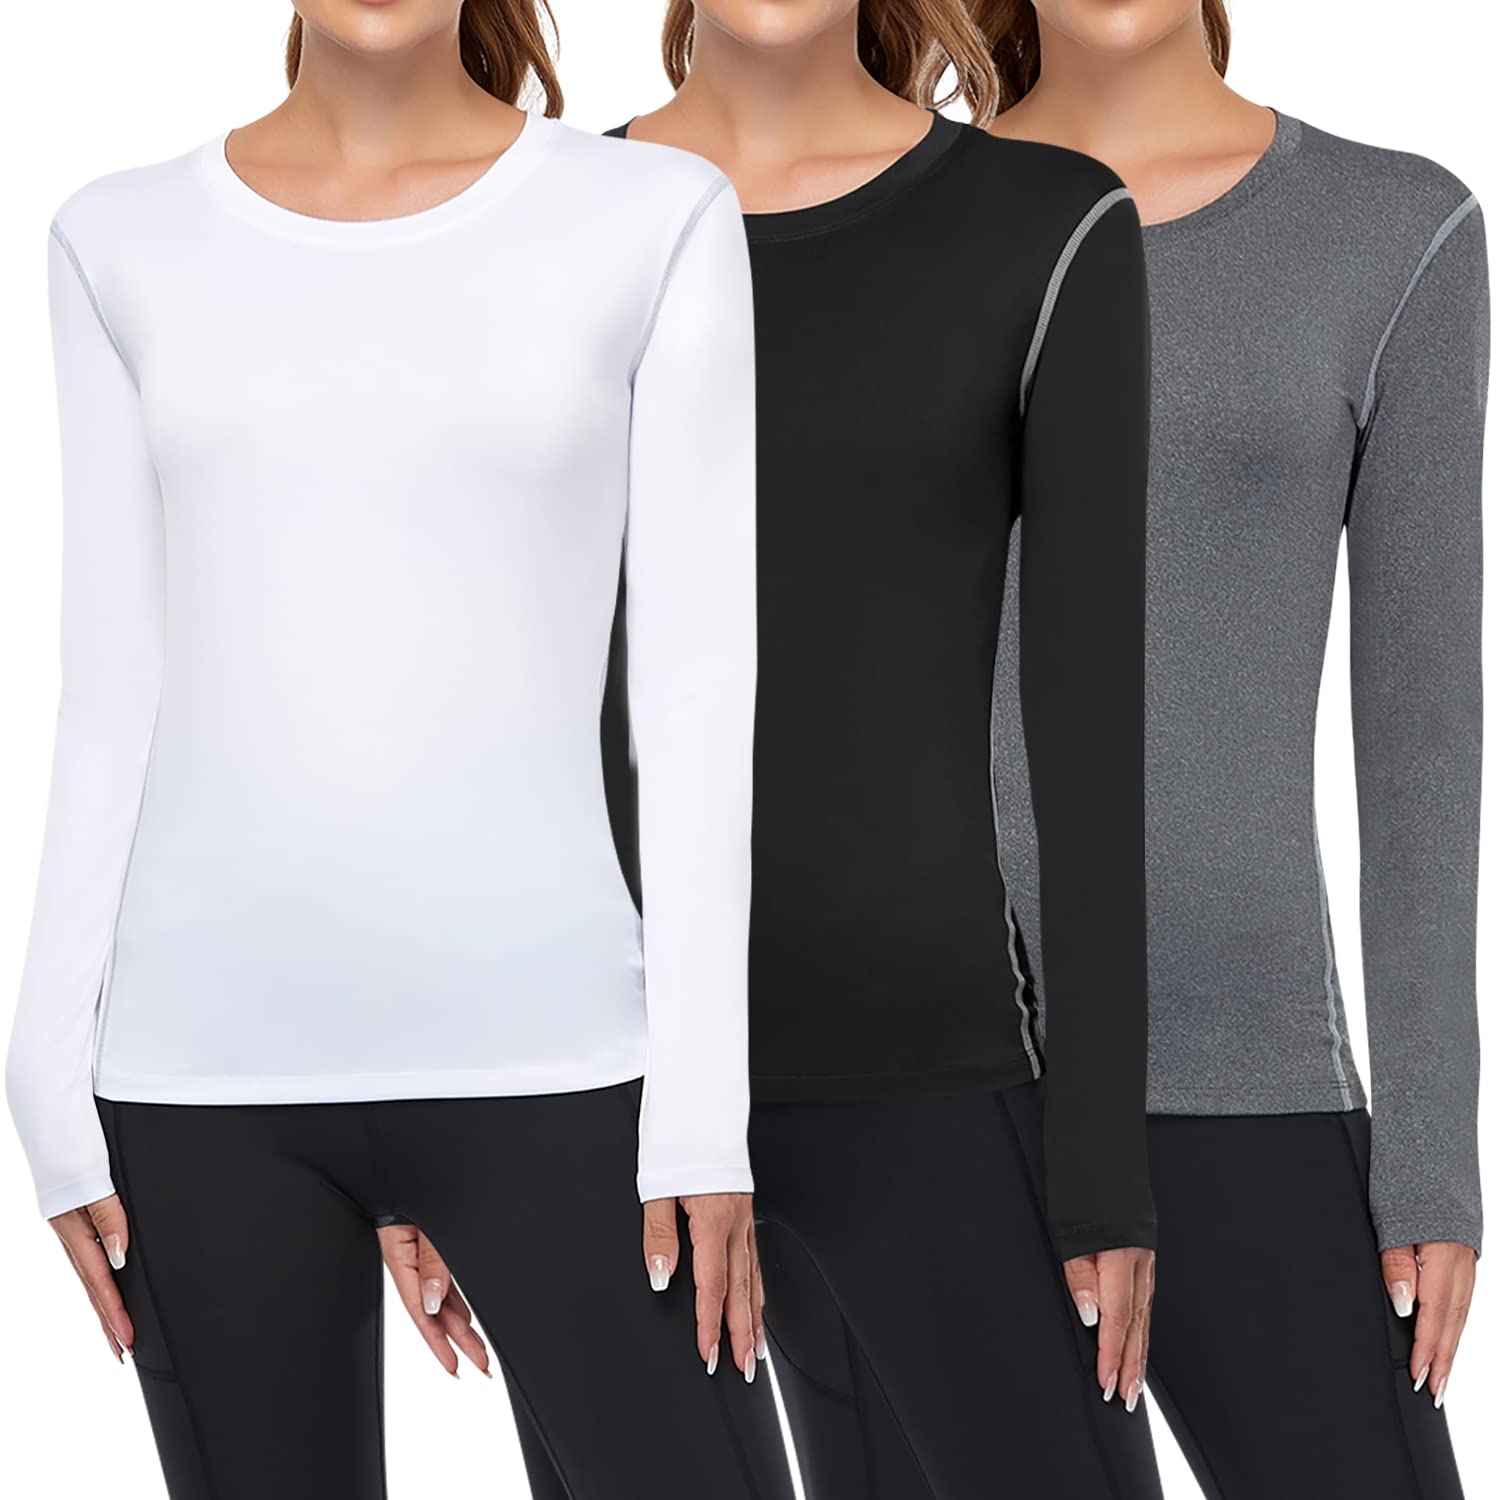 WANAYOU Women's 2-3 Pack Compression Shirt Dry Fit Long Sleeve Running  Athletic T-Shirt Workout